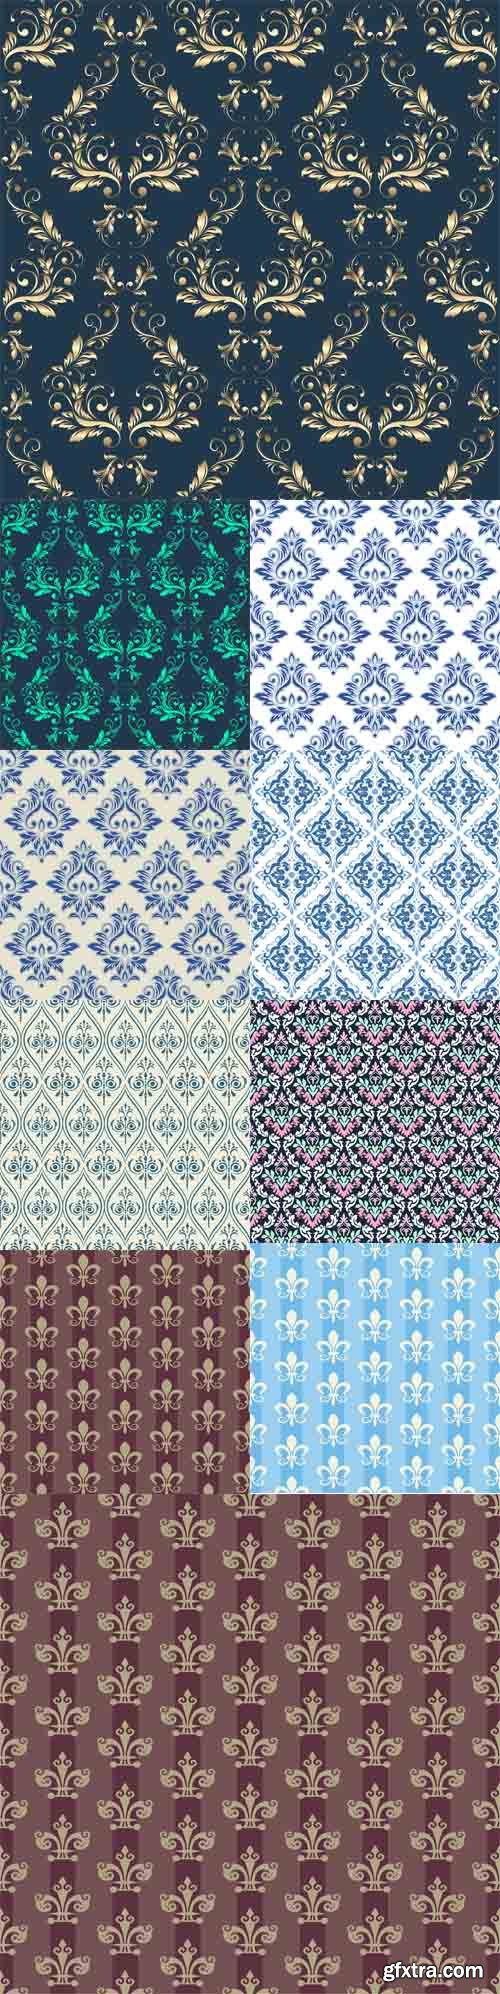 10 Abstract vintage seamless damask pattern vector set